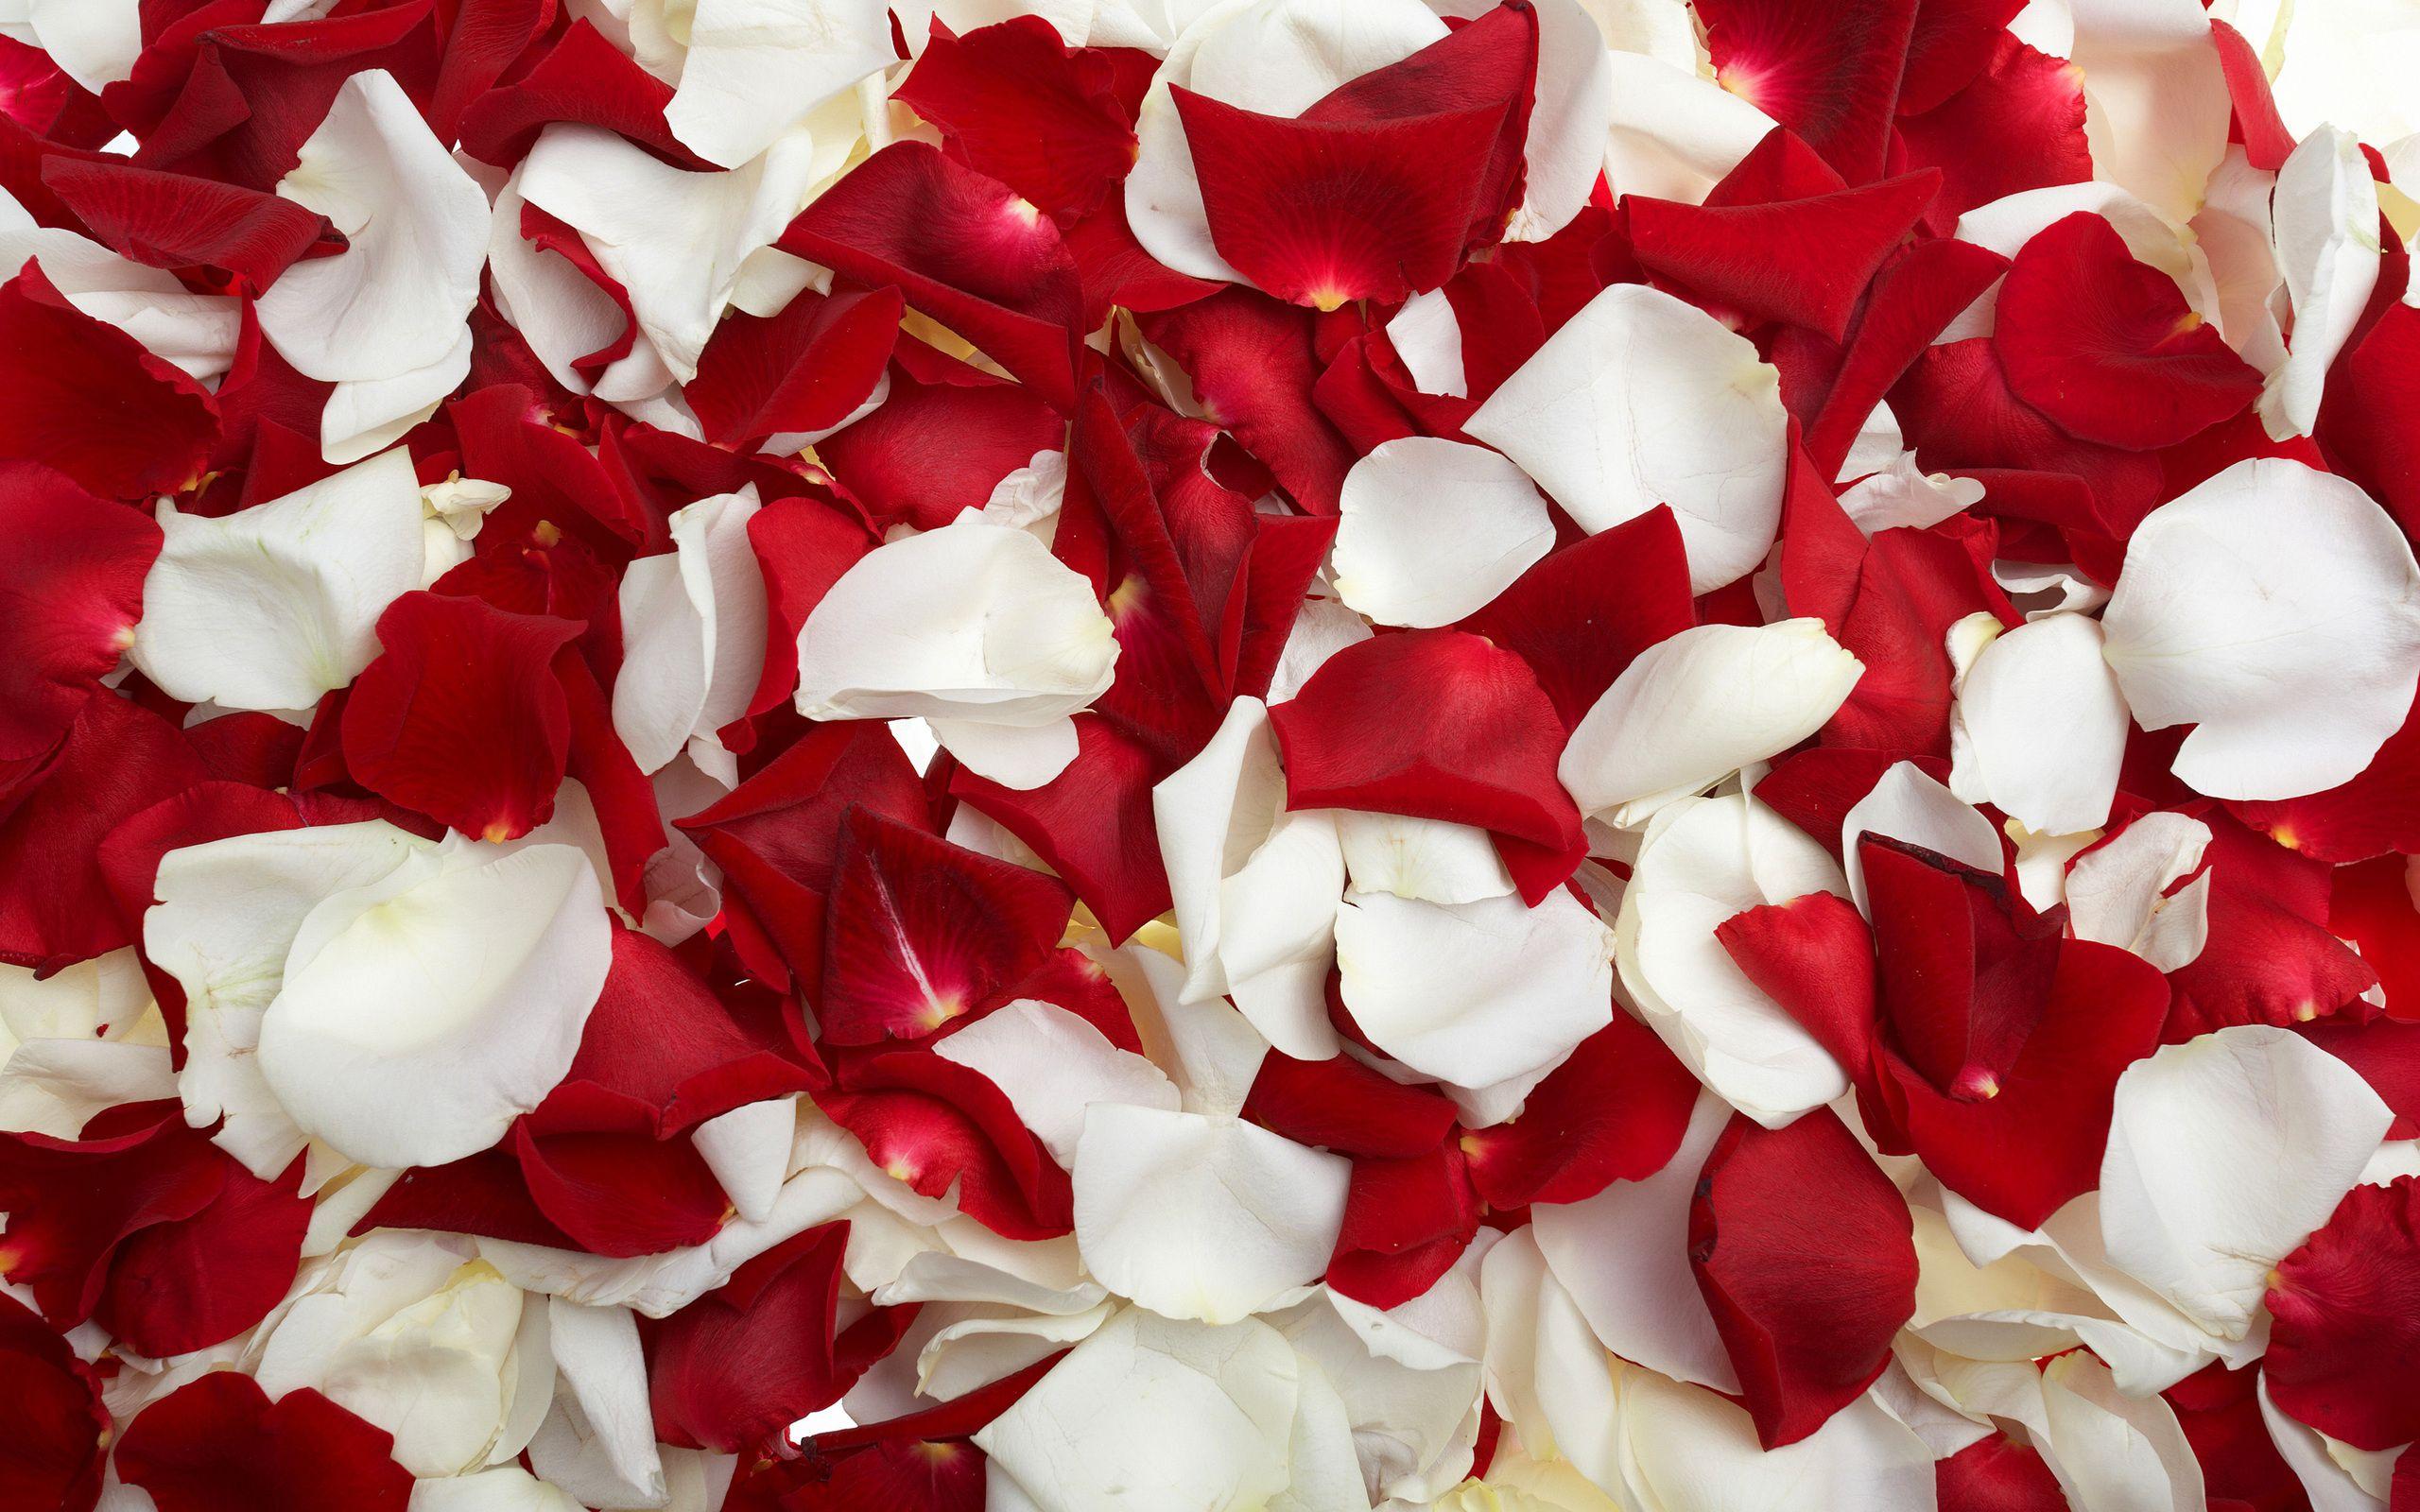 Red and White Roses, High Definition, High Quality, Widescreen